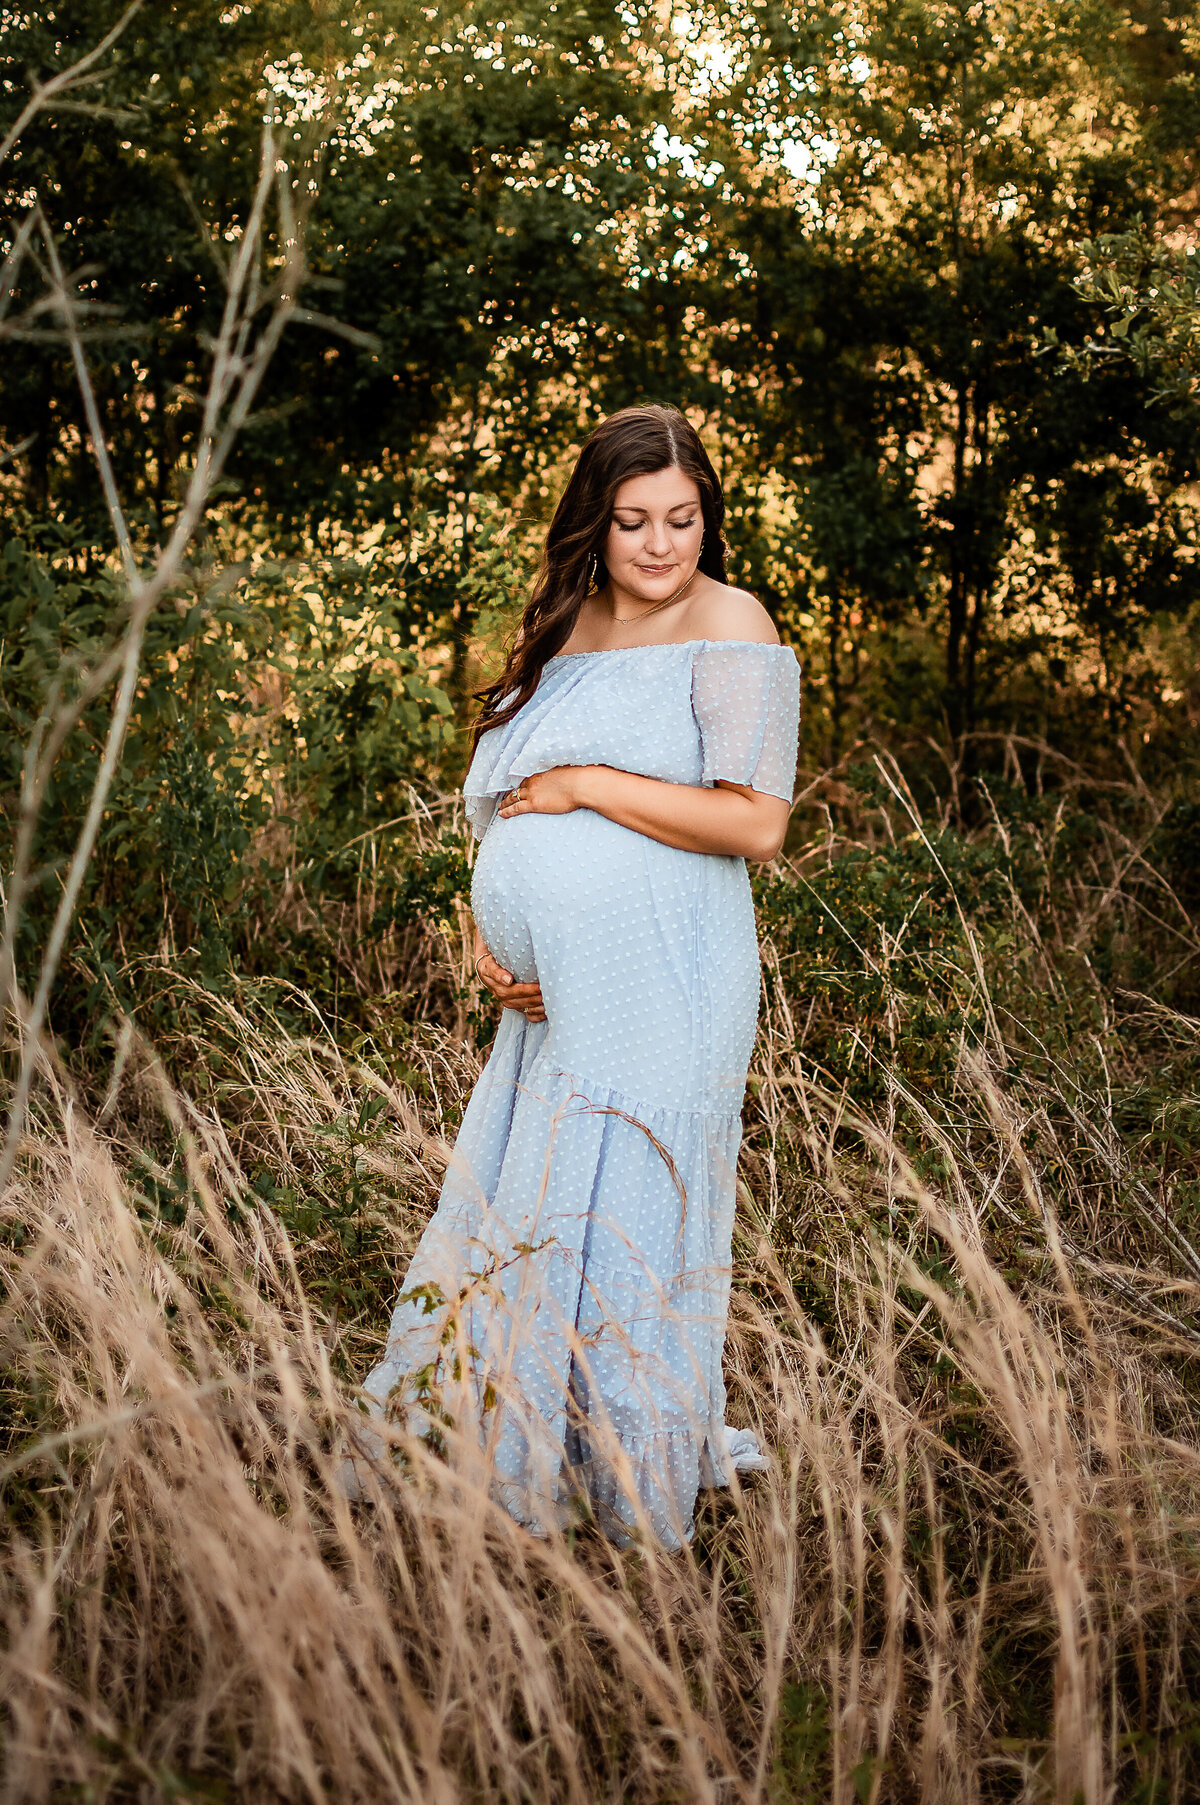 An expectant mother holds her belly and smiles down at her shoulder as she stands in a field of golden grass.